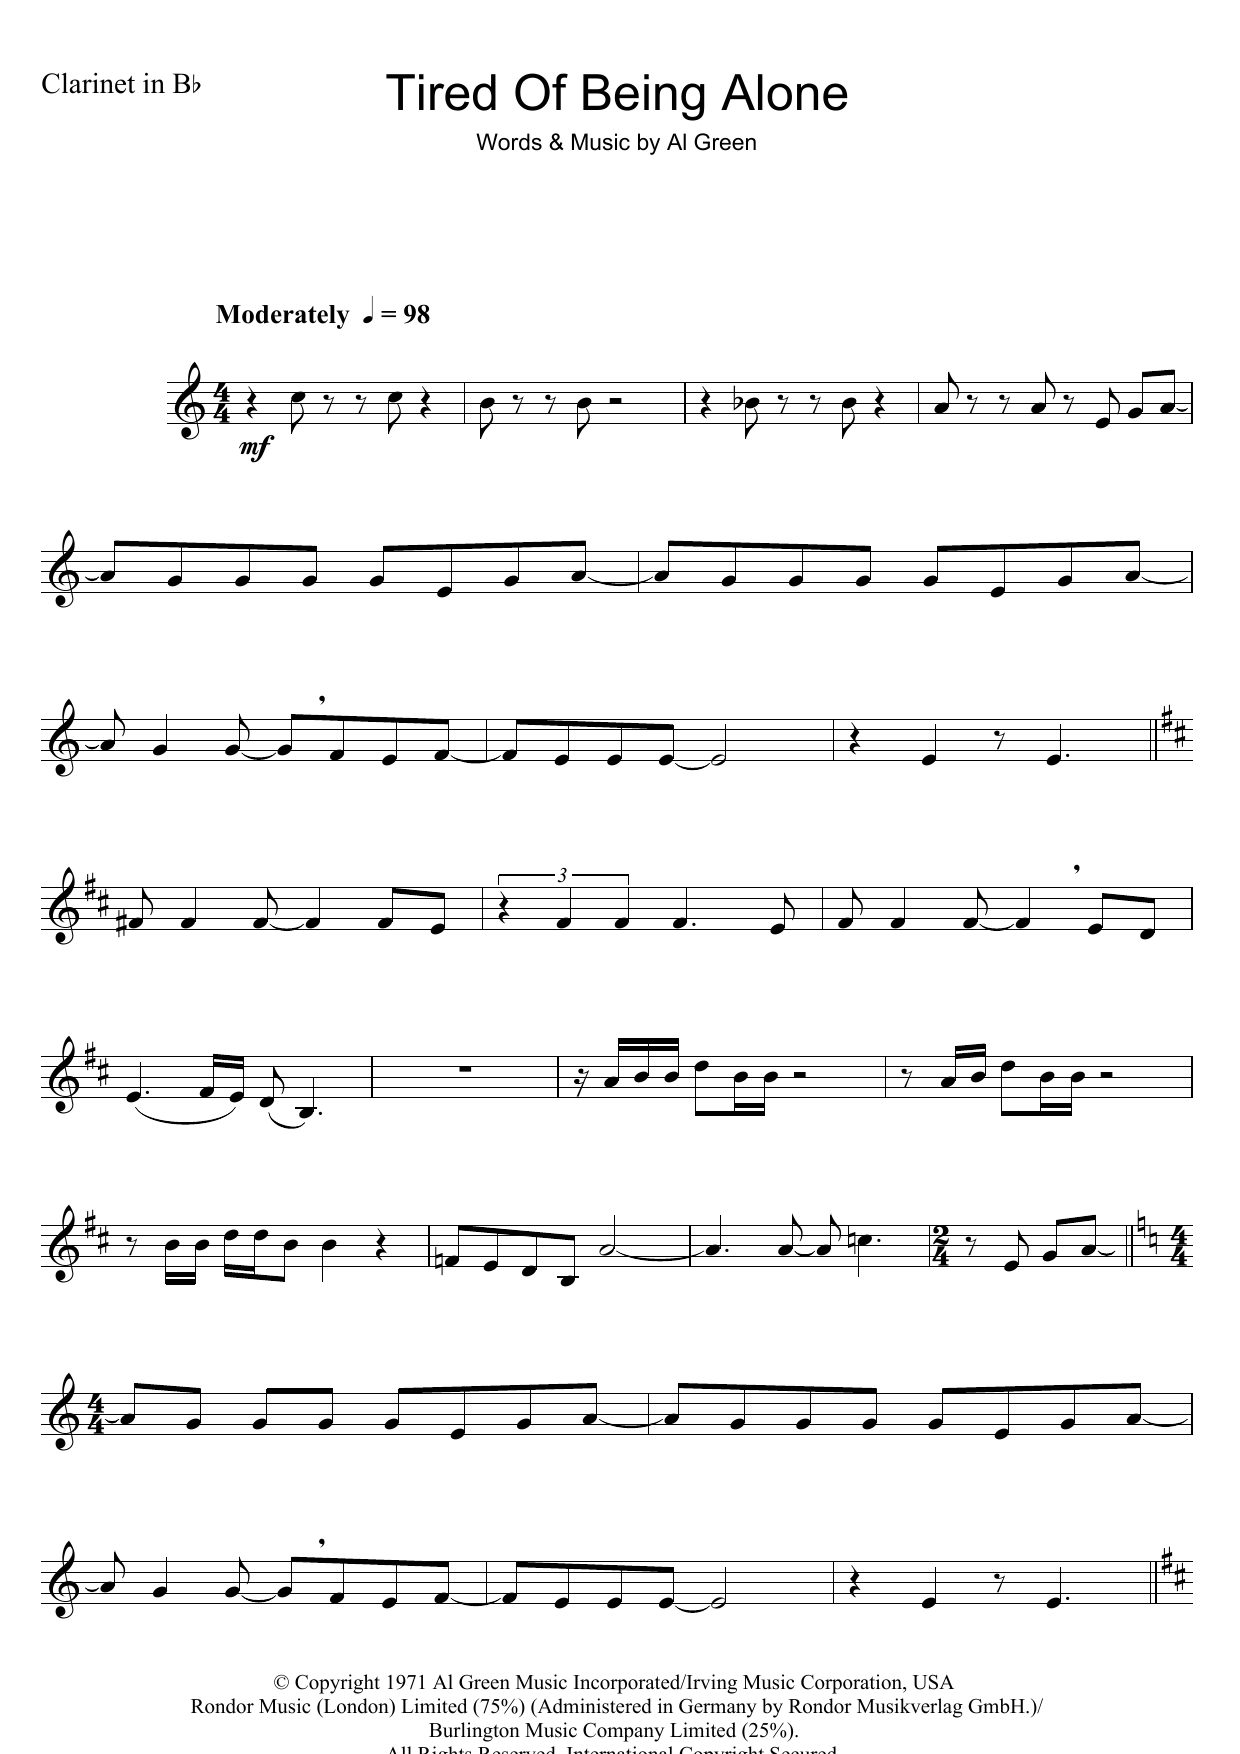 Download Al Green Tired Of Being Alone Sheet Music